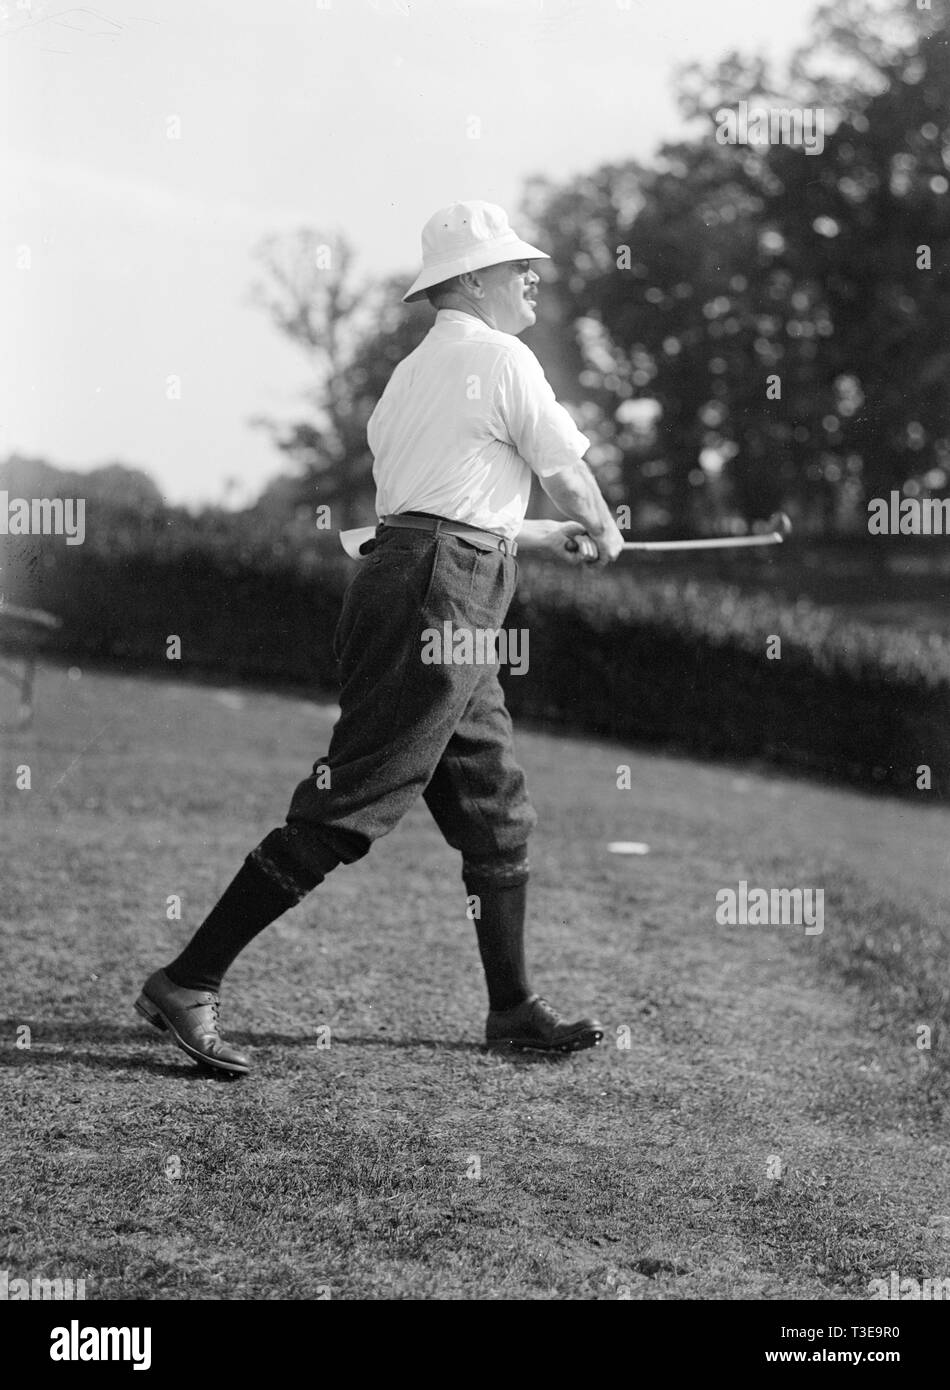 Vintage Golf Photo - Politician playing golf ca. 1917 Stock Photo